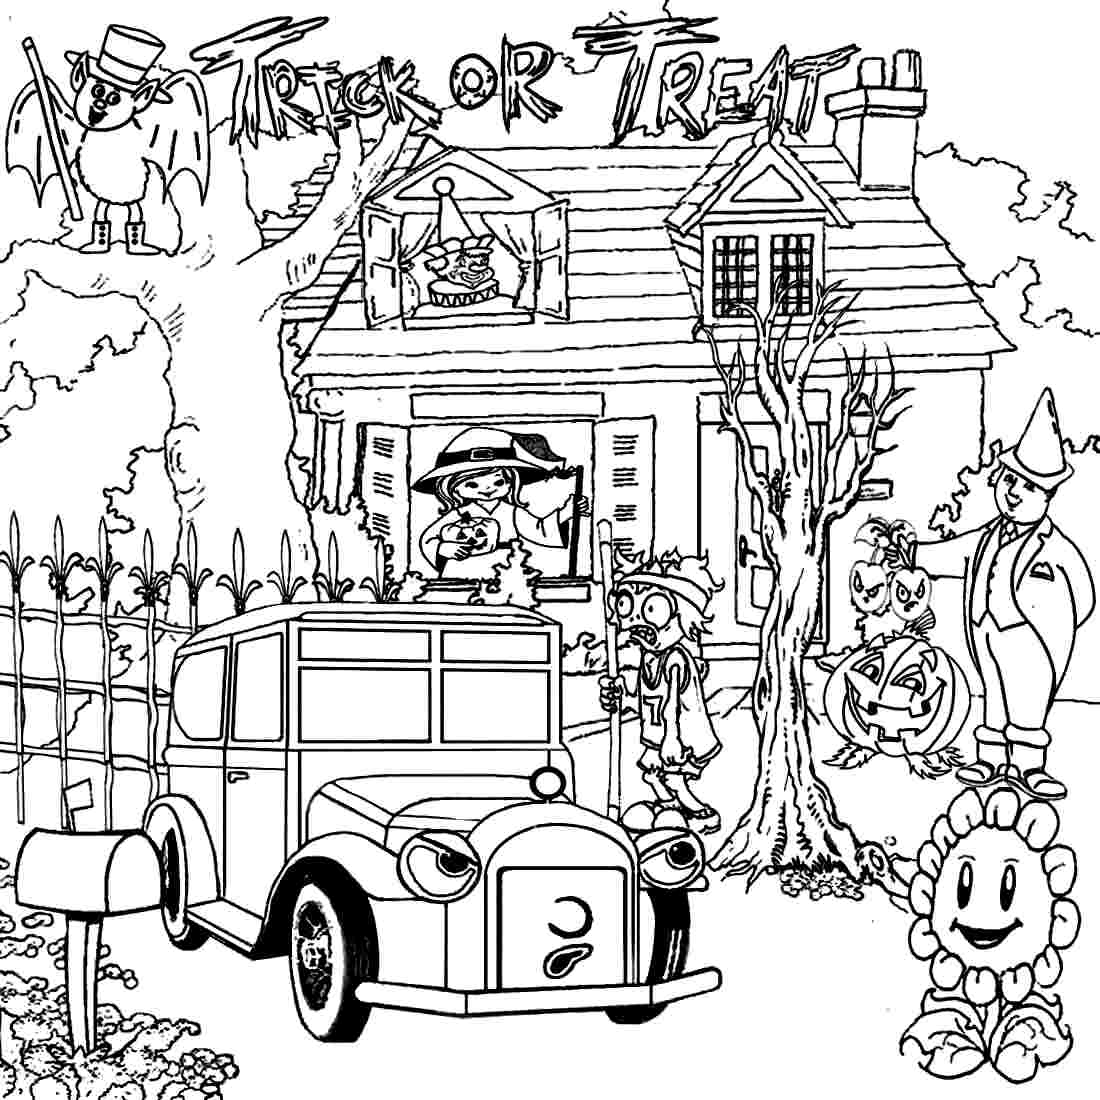 Scary haunted house coloring pages download and print for free